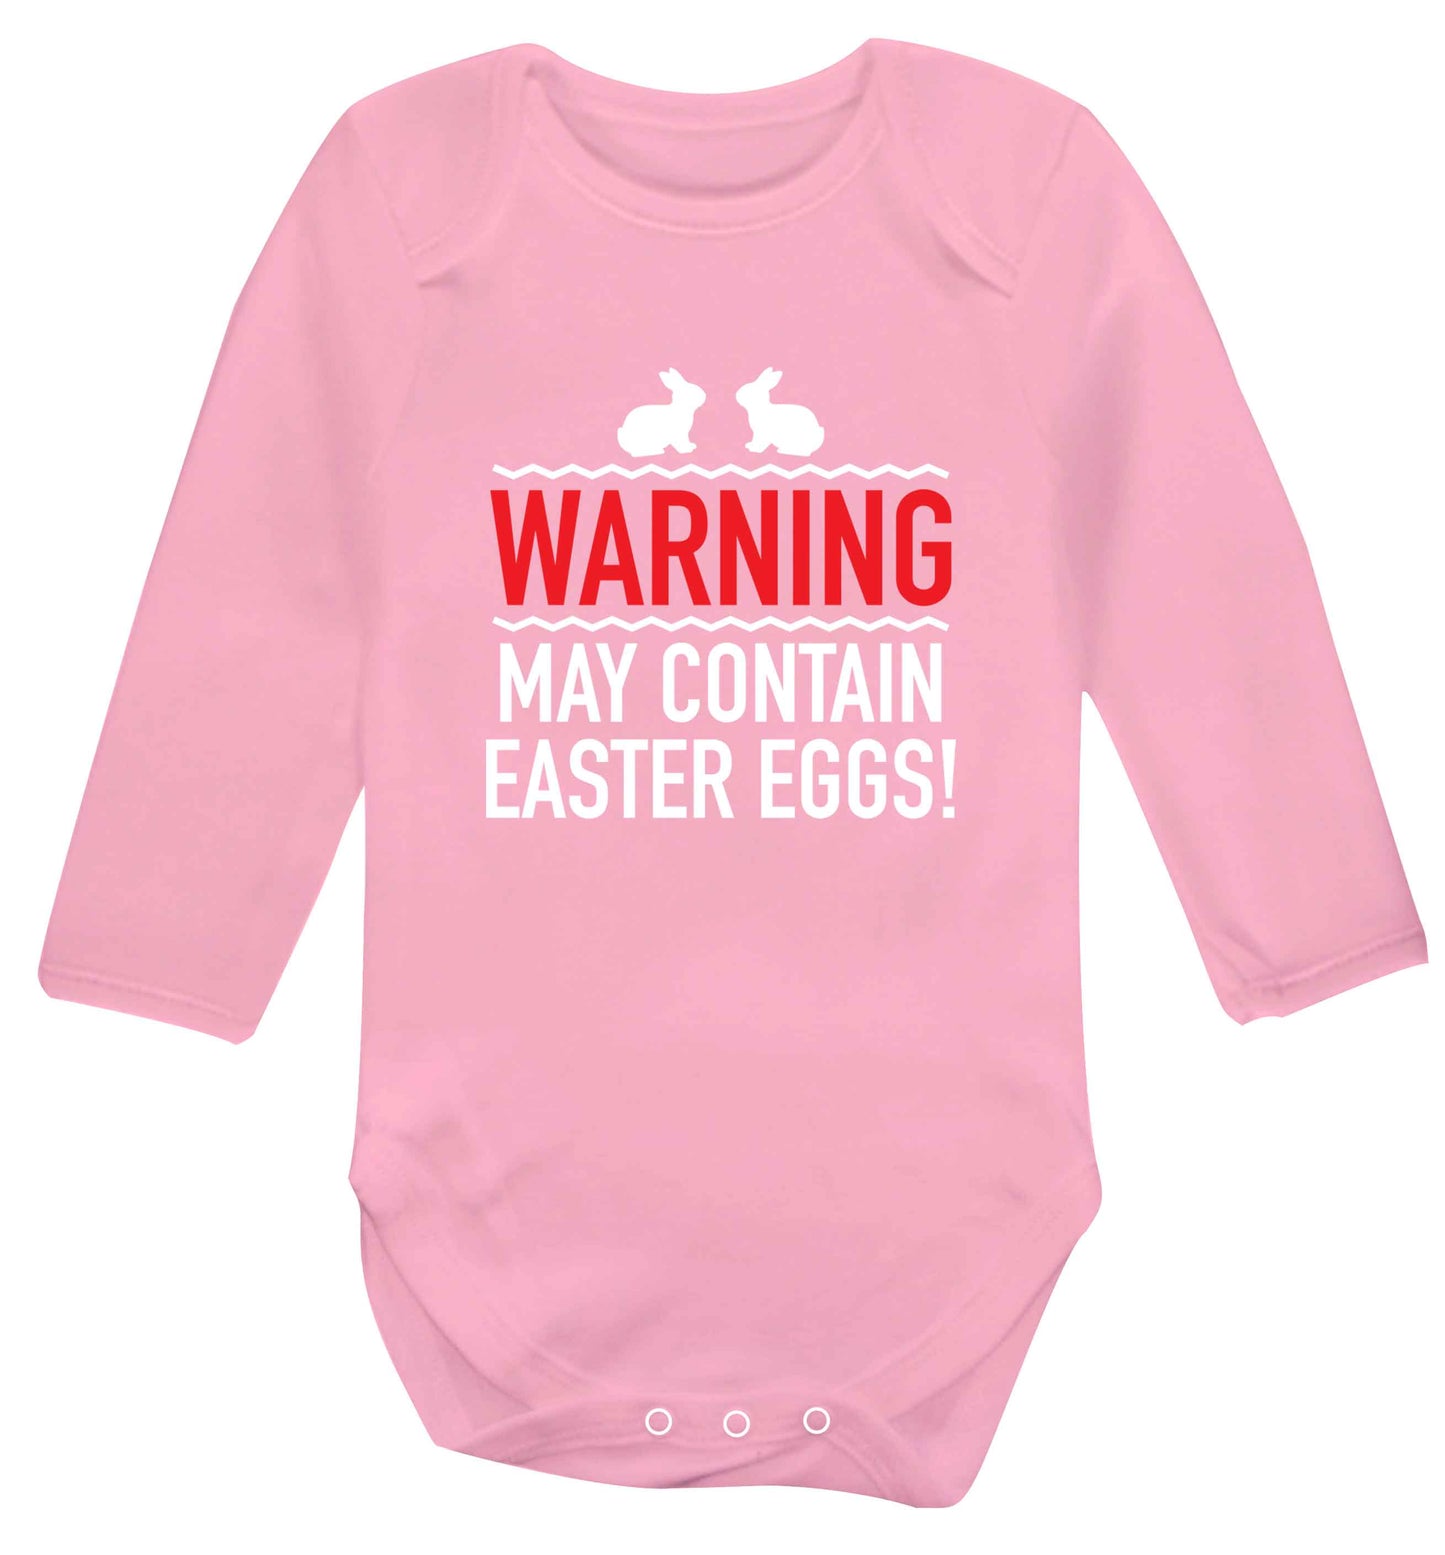 Warning may contain Easter eggs baby vest long sleeved pale pink 6-12 months